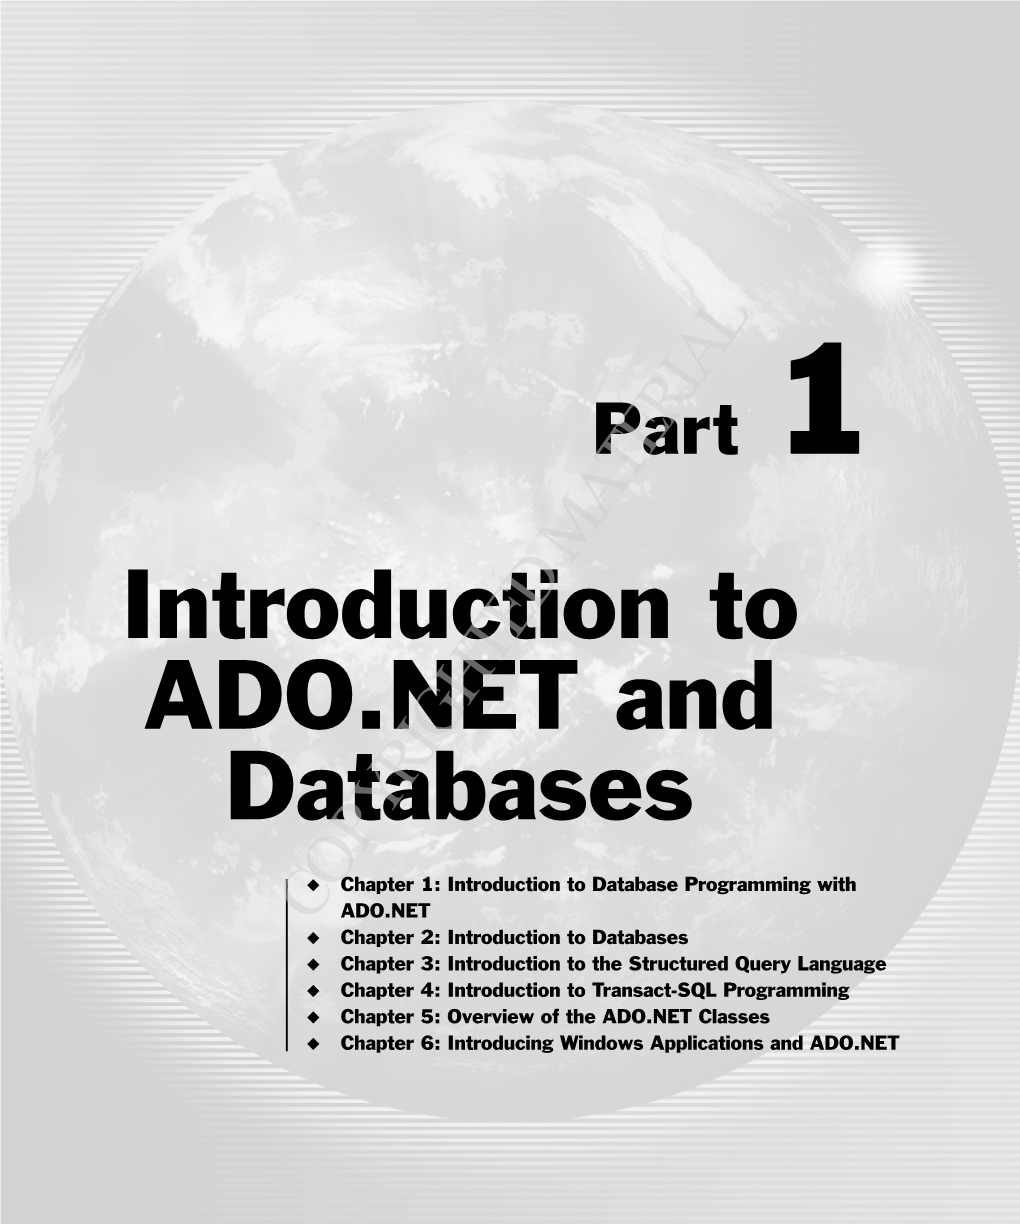 Introduction to ADO.NET and Databases